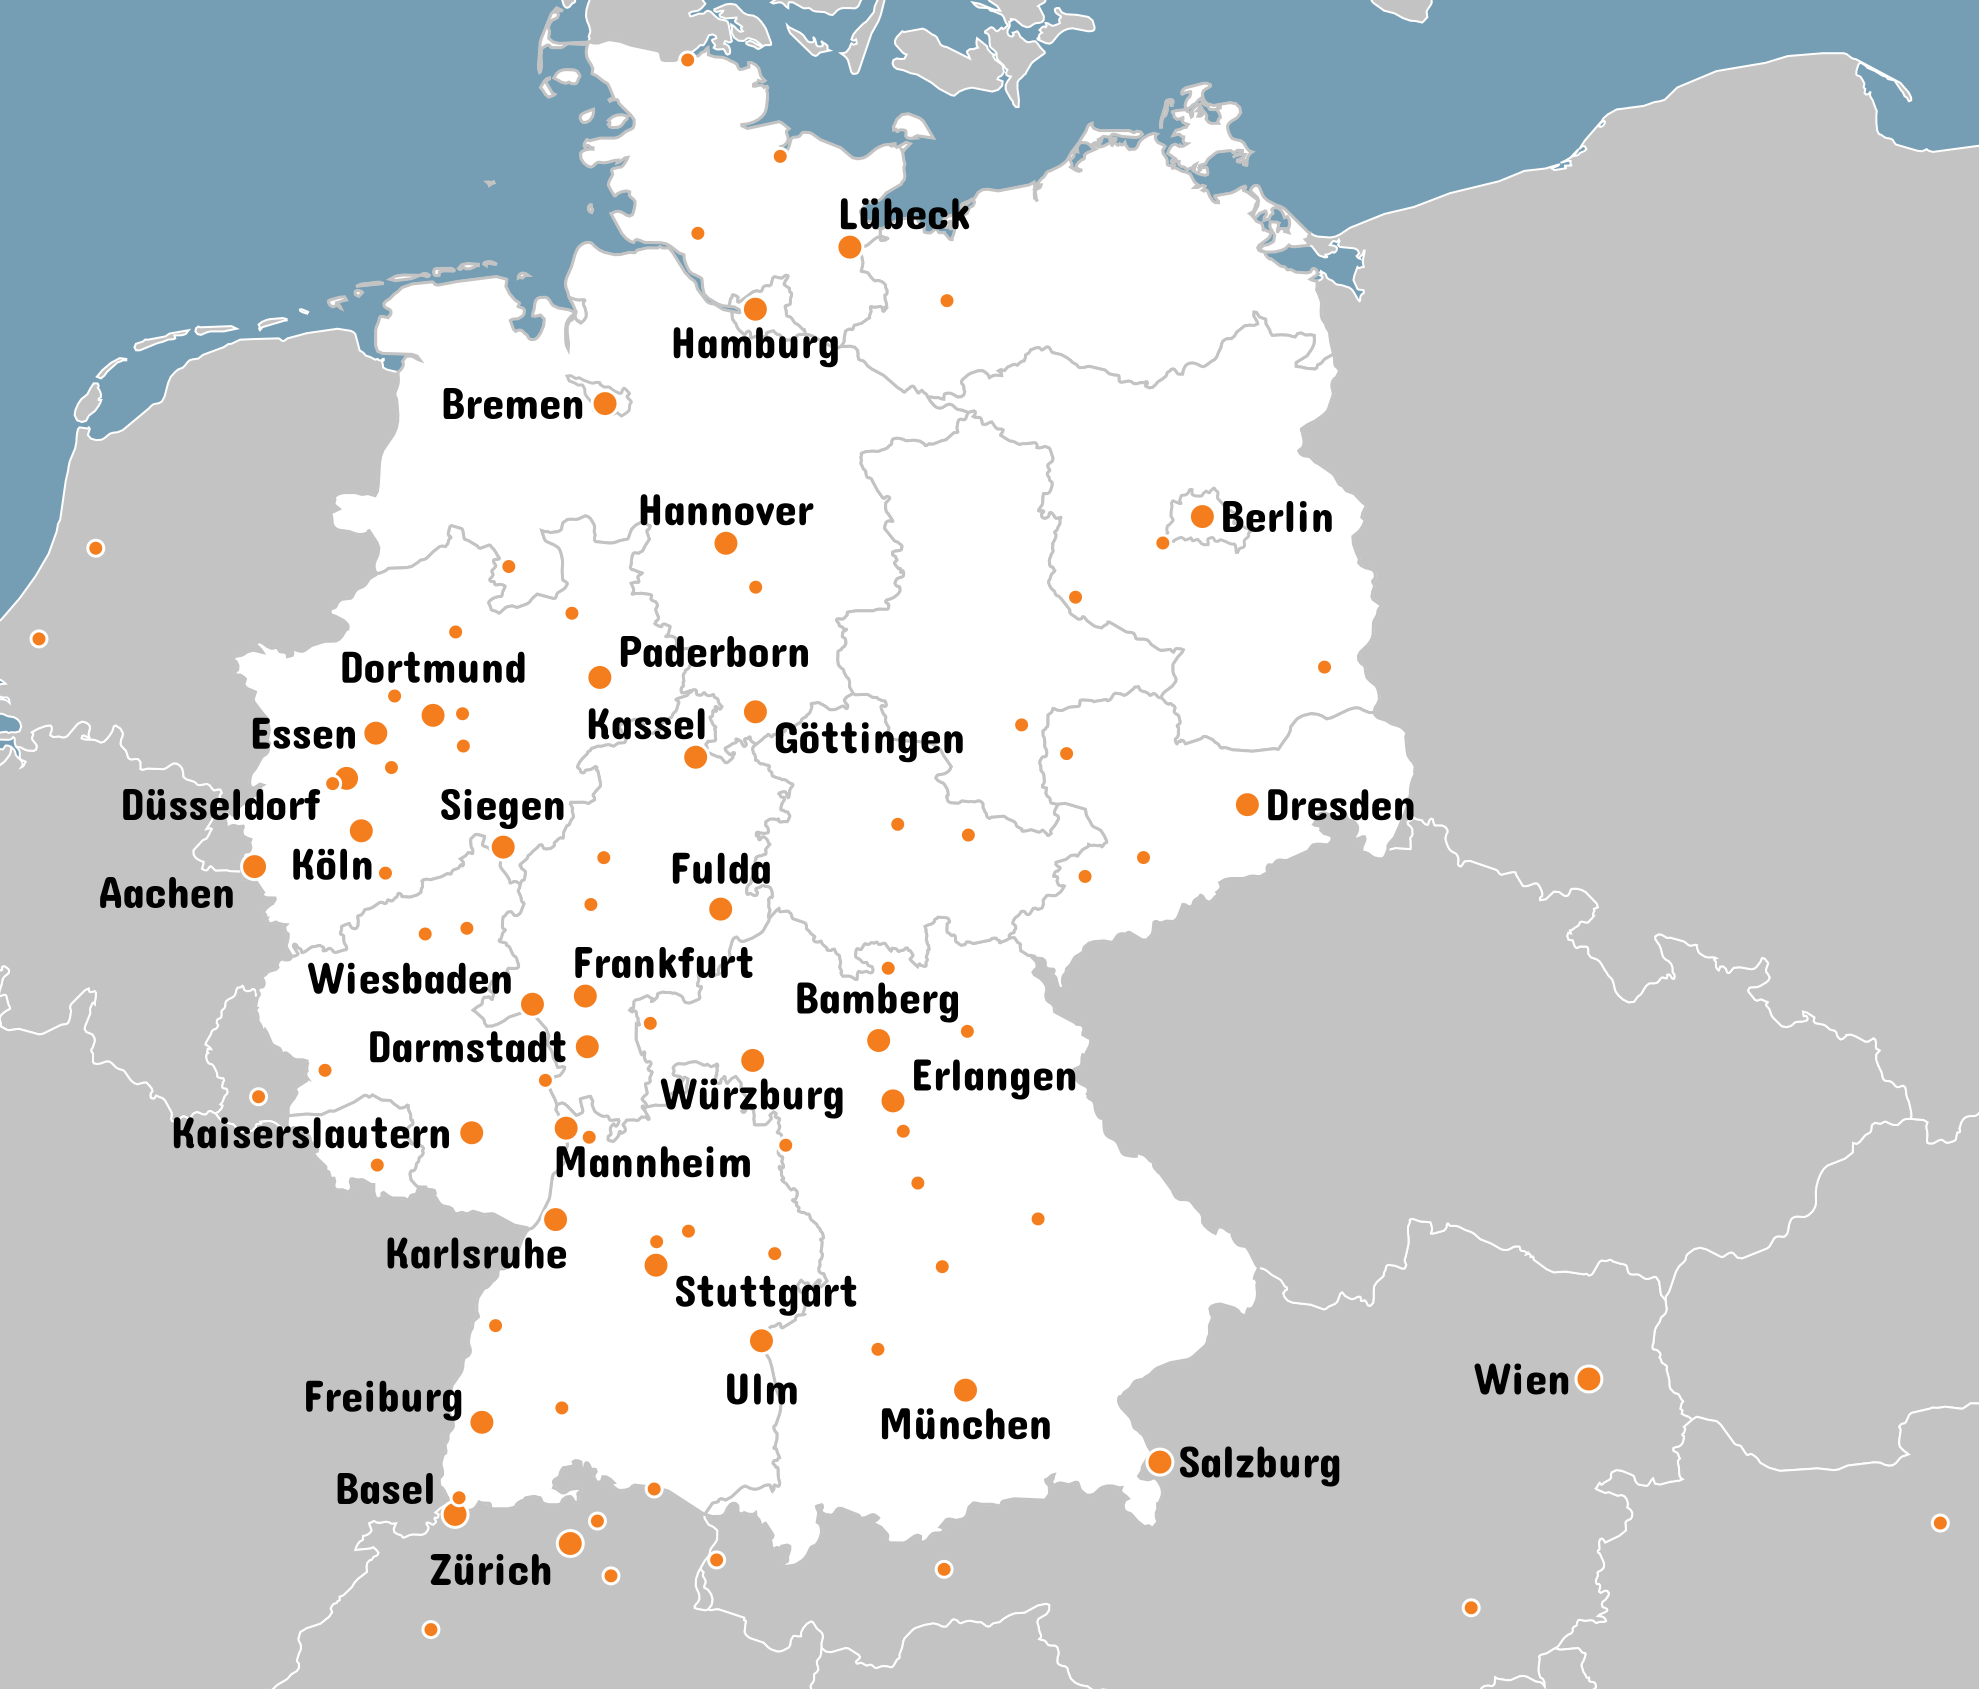 The new, fully automatically created map, as it is now also available on ccc.de.